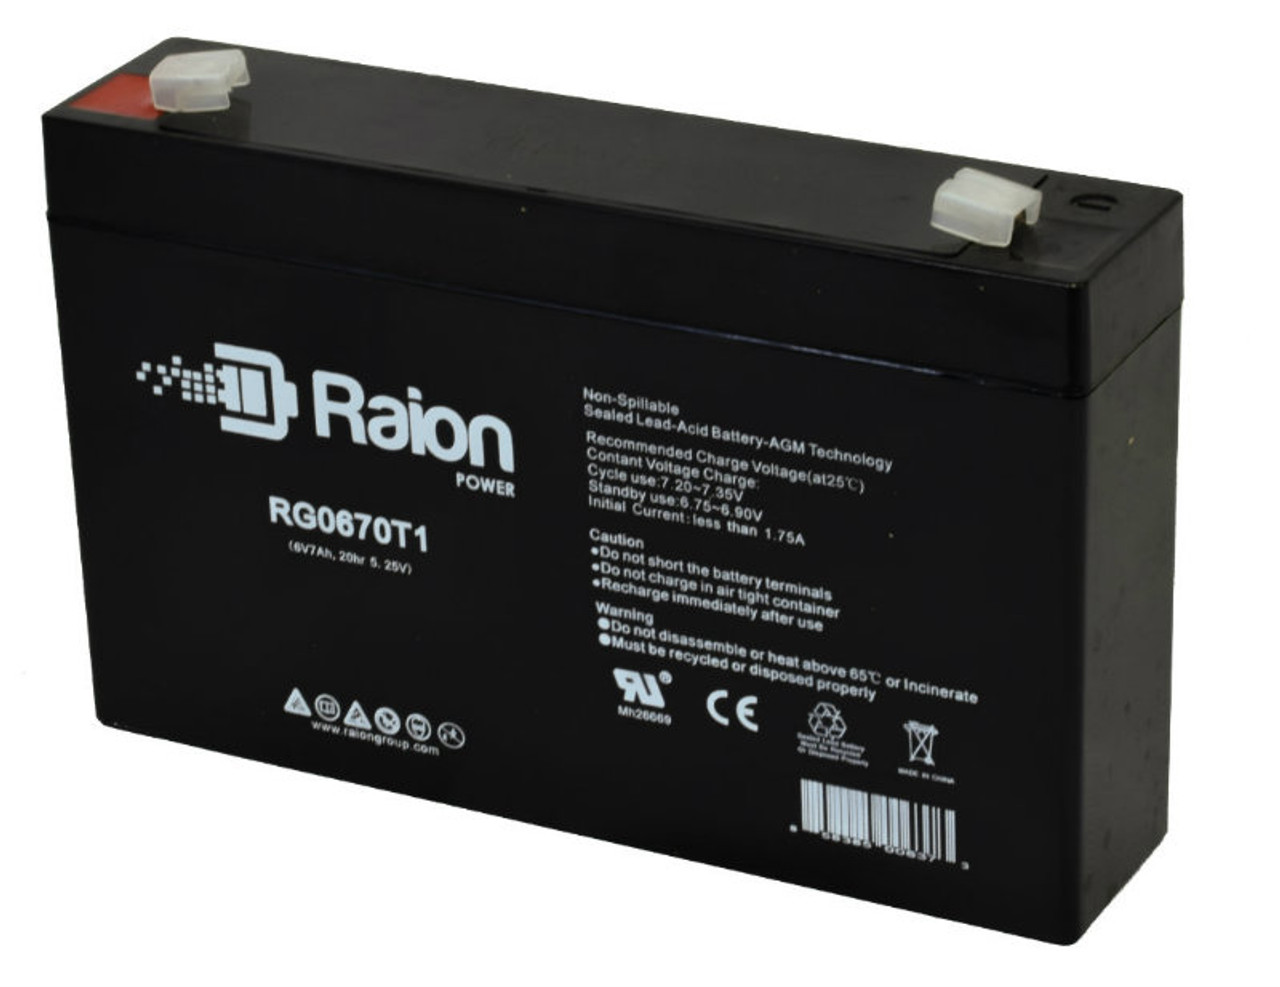 Raion Power RG0670T1 6V 7Ah Replacement Emergency Lighting Battery for Dual Lite 12-826